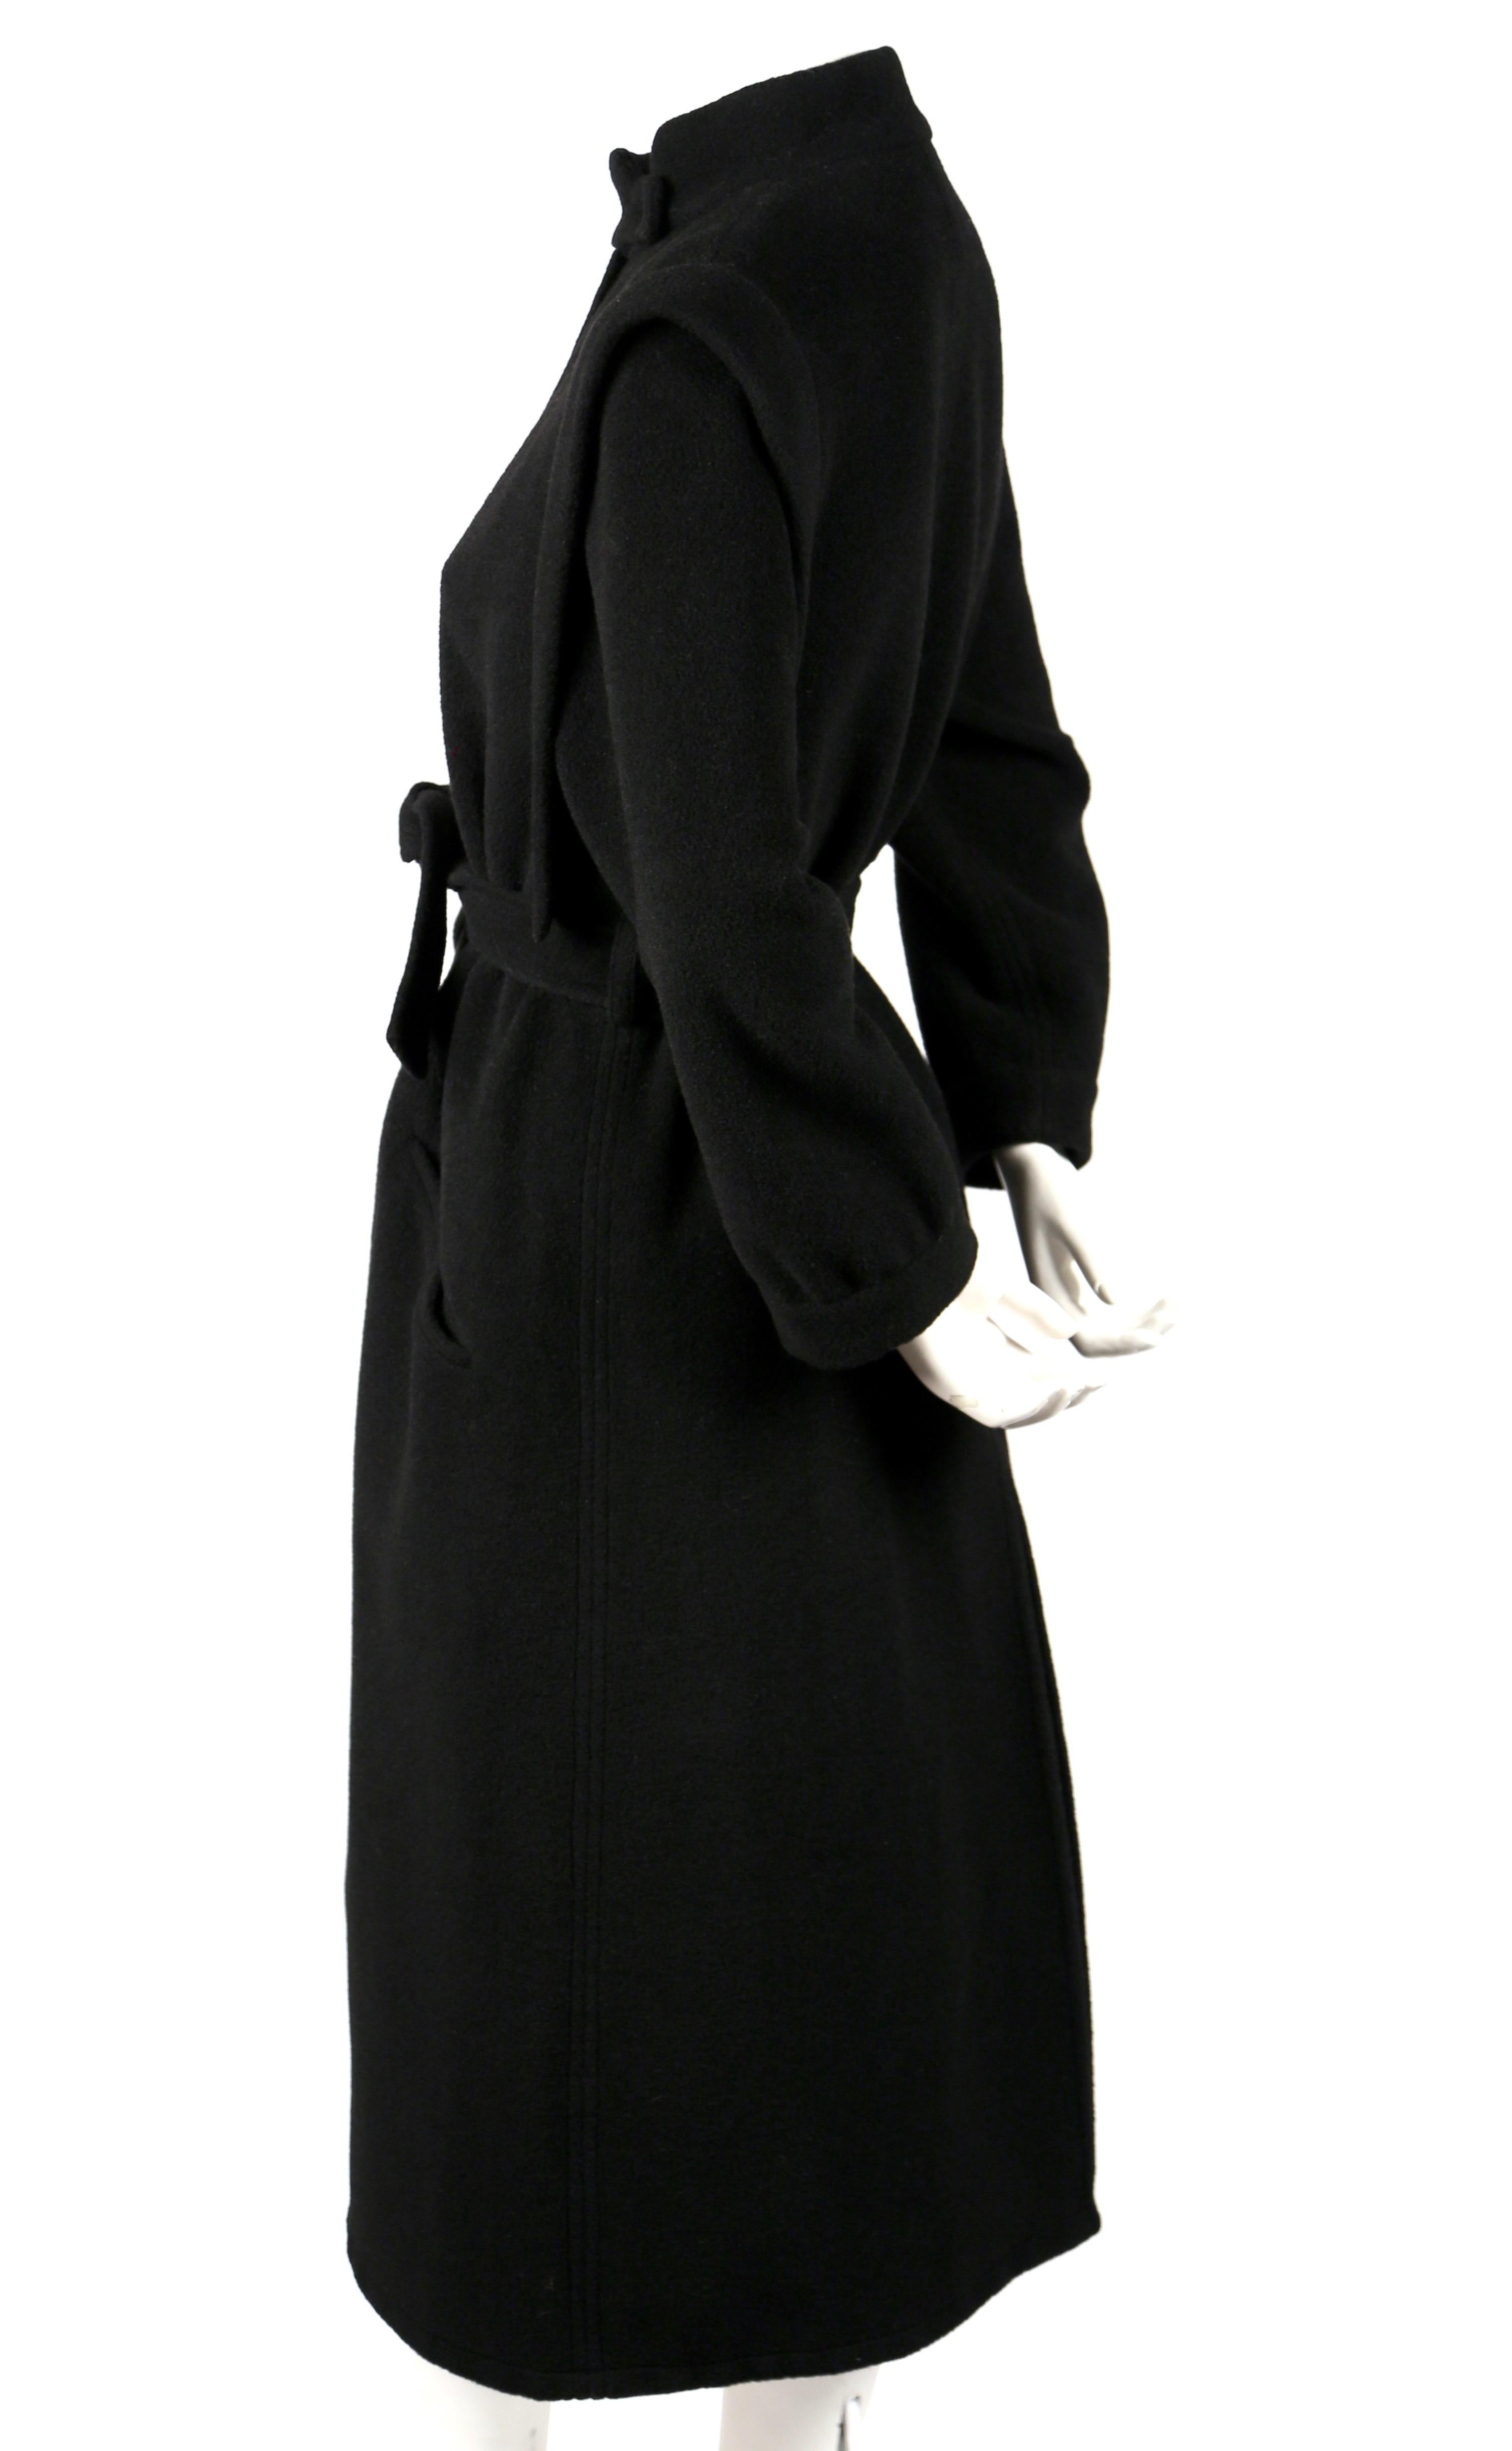 1970s Sonia Rykiel black wool coat with structured shoulders and metal buttons In Good Condition For Sale In San Fransisco, CA